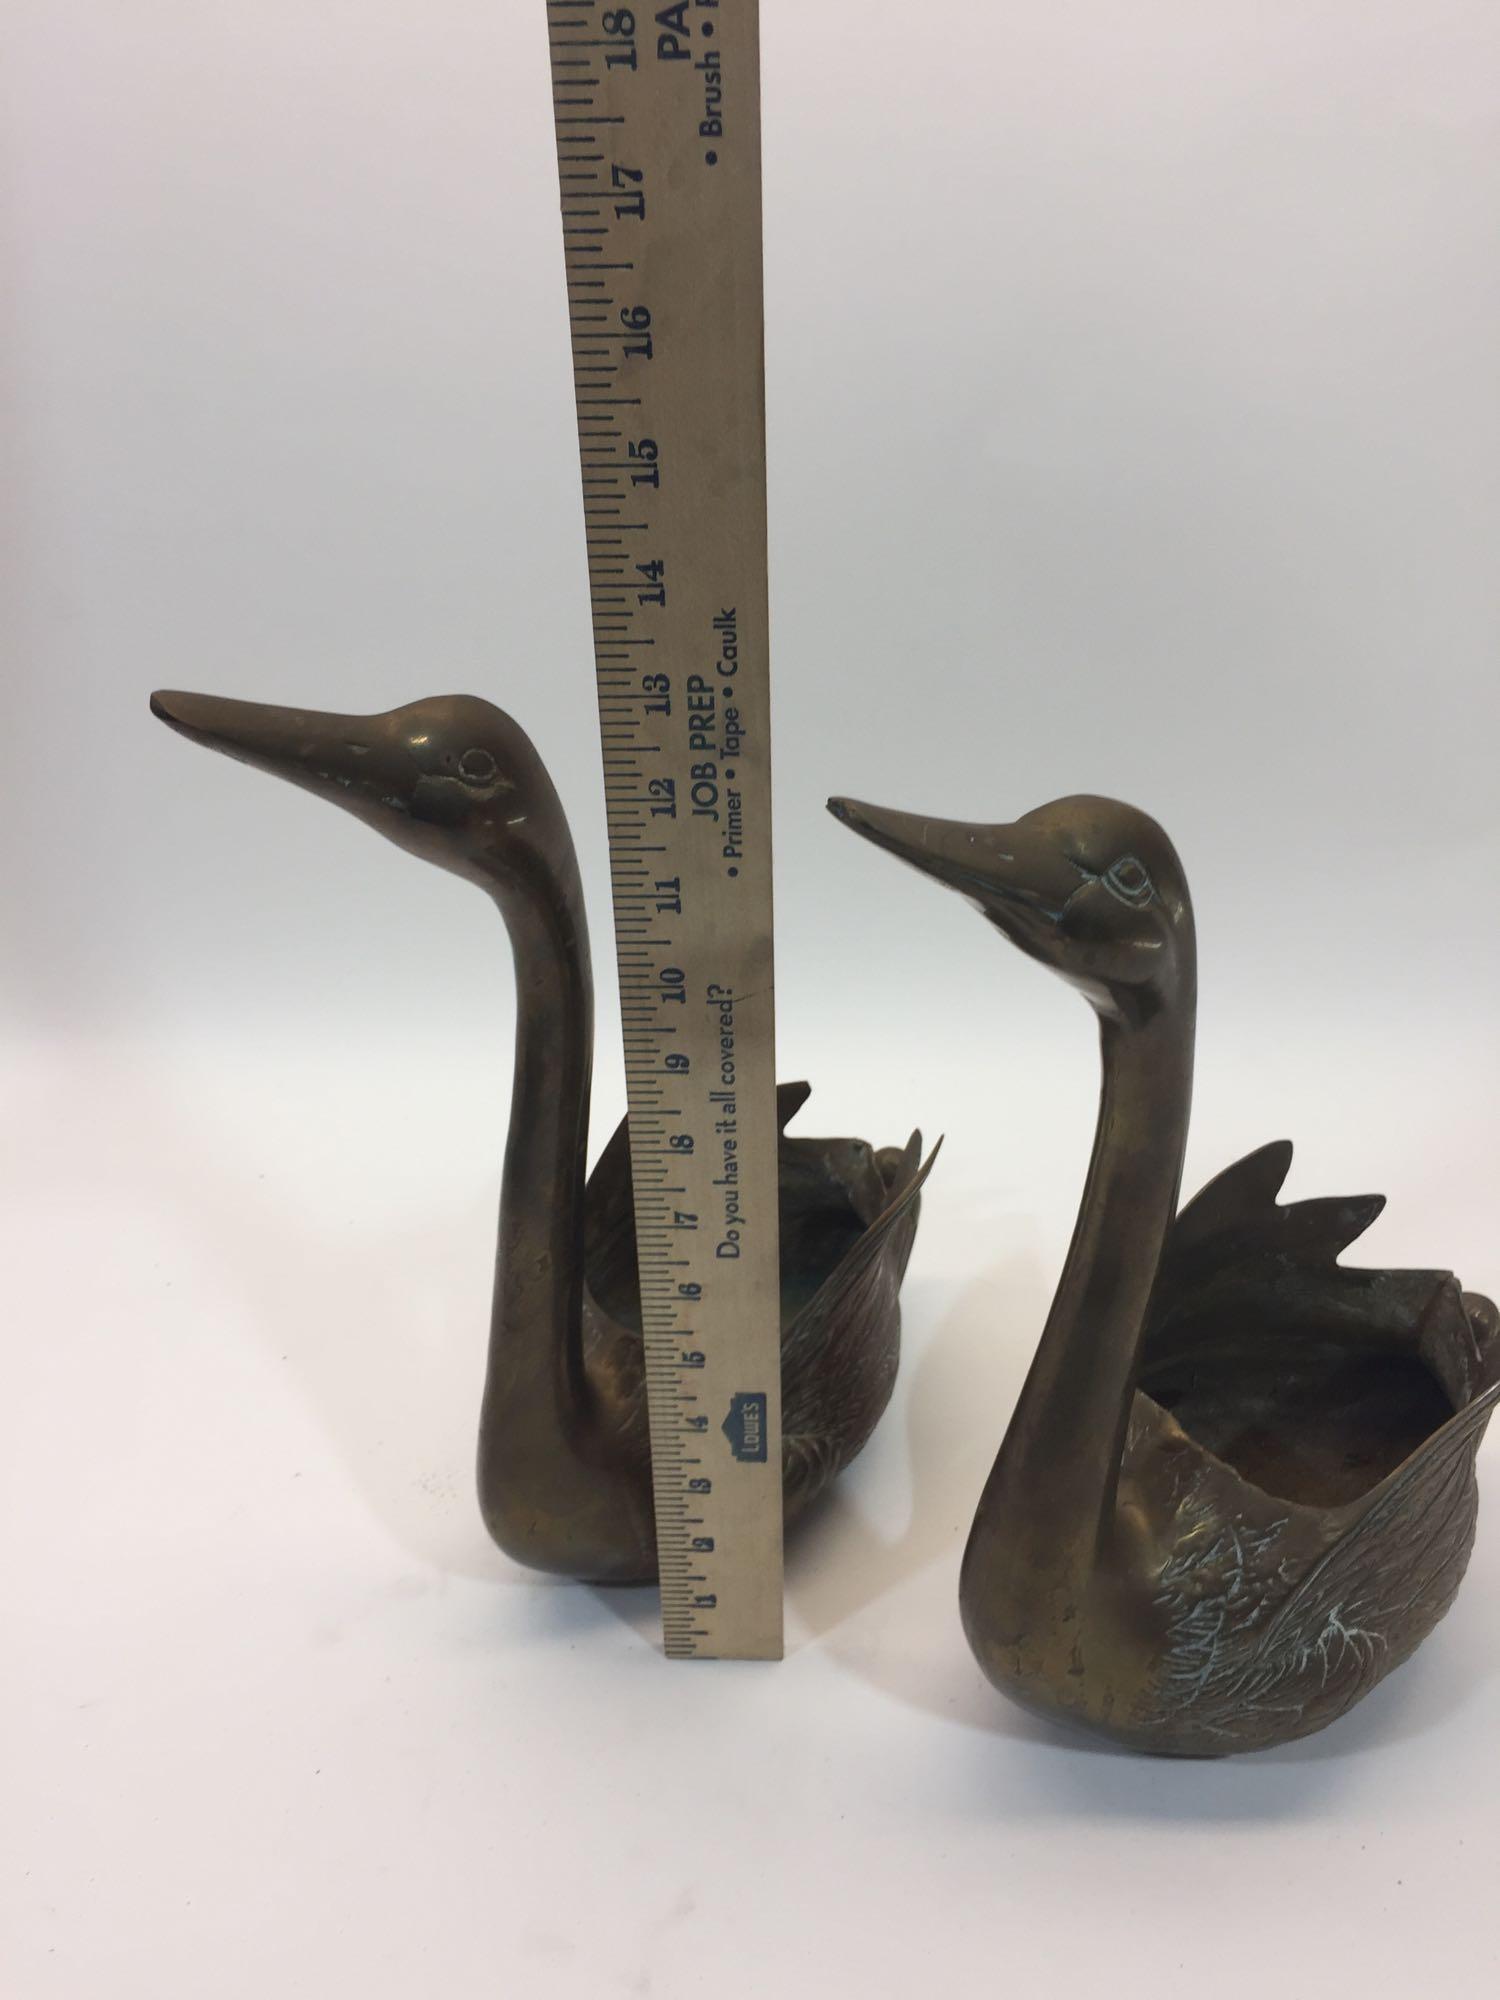 2 Metal Swans -14in Tall